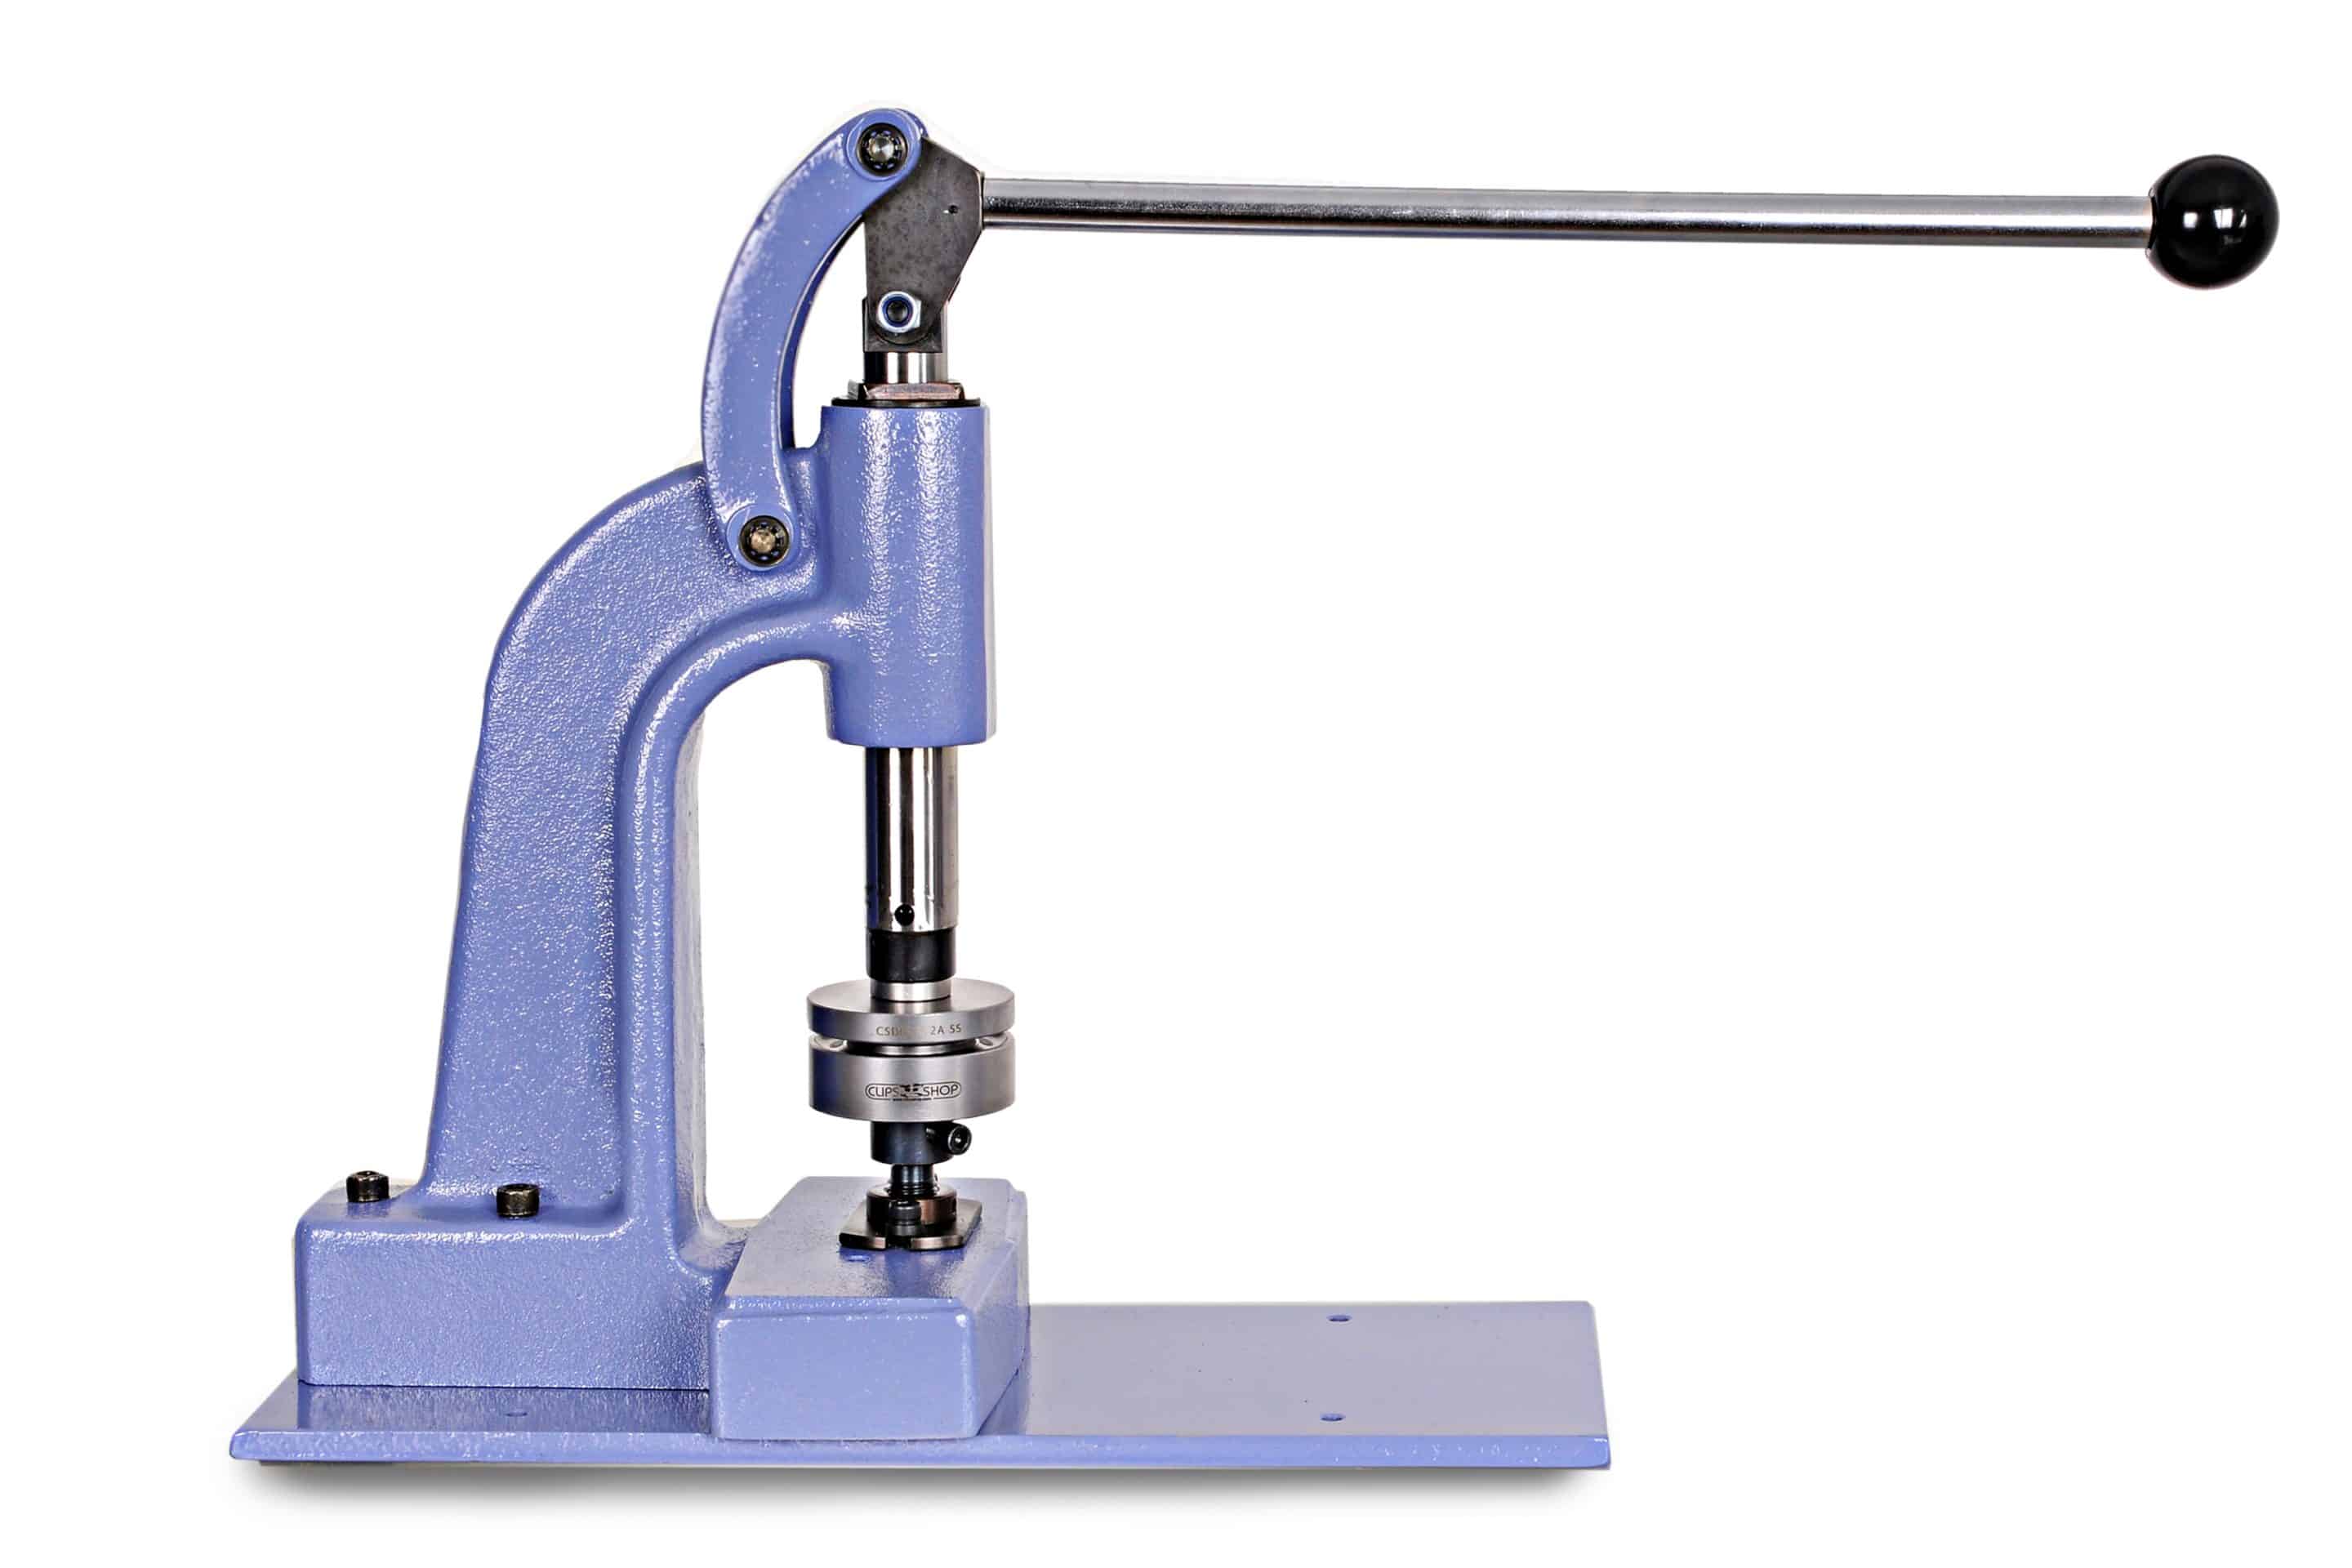 Metal Grommet Hand Press Creates 1,200 lbs of Attachment Force